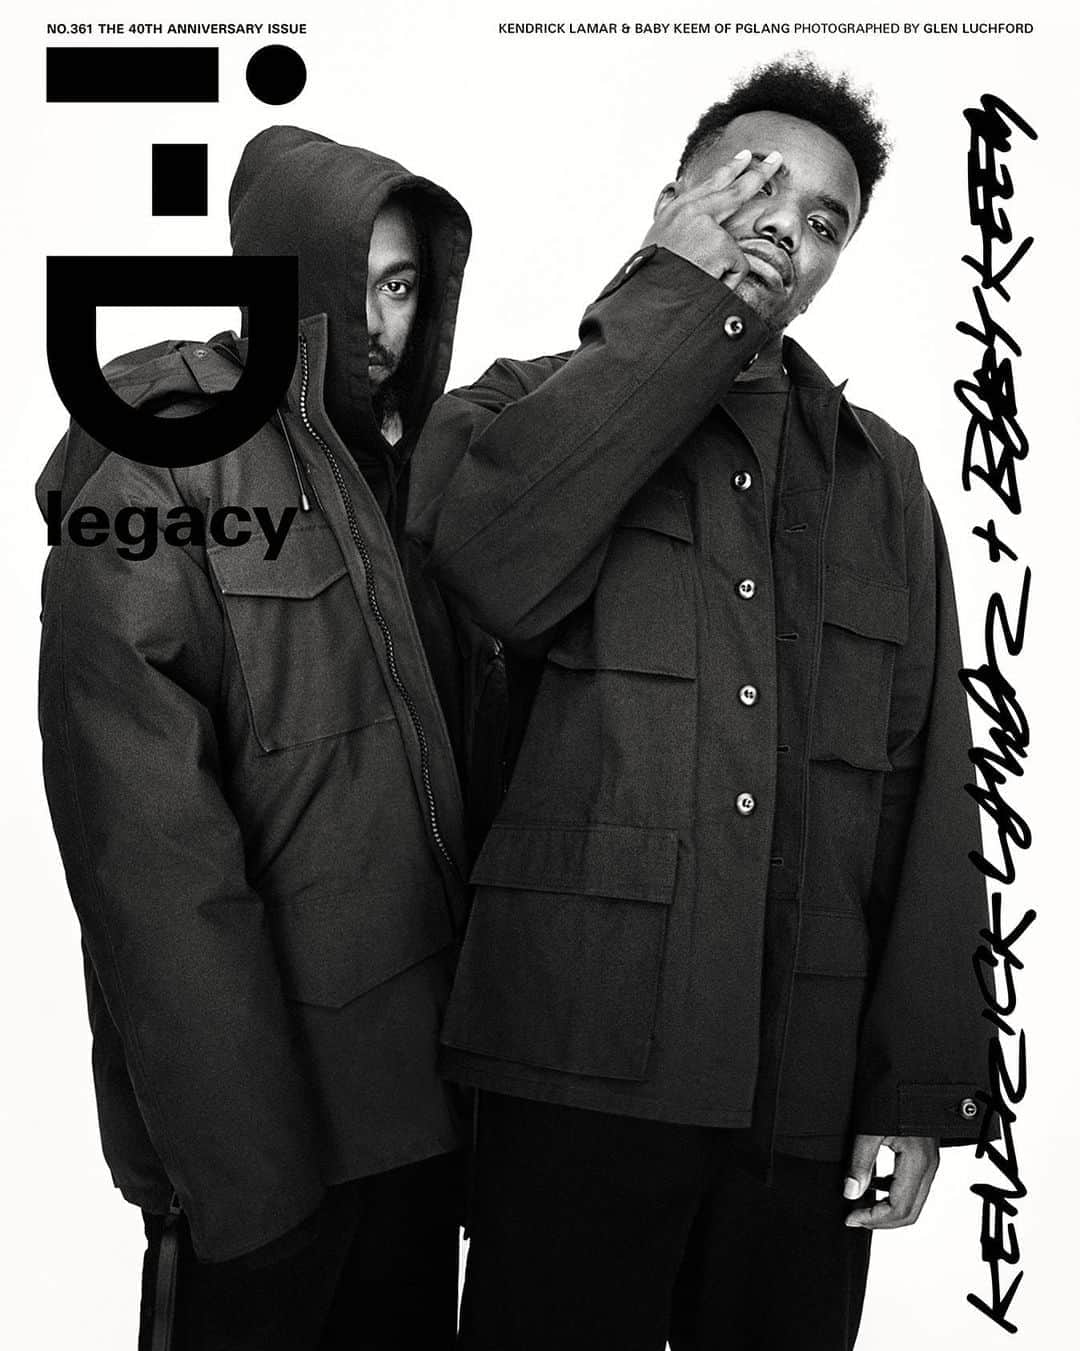 i-Dさんのインスタグラム写真 - (i-DInstagram)「Introducing the first cover stars of i-D’s 40th Anniversary Issue, @kendricklamar and @keem ⁣ At the link in bio, one of the most important artists of his generation hits pause to talk with one of most exciting new rappers on the planet.⁣ ⁣ On sale now at www.i-dstore.co⁣⁣⁣ 🛒⁣⁣⁣⁣⁣⁣⁣⁣ ⁣⁣⁣⁣⁣⁣⁣⁣ [The 40th Anniversary Issue, No. 361, Autumn 2020]⁣⁣⁣⁣⁣⁣⁣⁣⁣⁣⁣⁣⁣⁣ ⁣ Handwriting by Futura 20000 @futuradosmil⁣ .⁣ .⁣ .⁣ Photography @_glen_luchford⁣ Fashion director @mr_carlos_nazario⁣ Editor in Chief and Creative Director @alastairmckimm⁣⁣⁠⁣ Creative Direction, Art Direction and Editorial Design @LauraGenninger @Studio191ny⁣ Styling (Kendrick) @dianne⁣ Styling (Baby Keem) @taylor__mcneill⁣ Grooming (Kendrick Lamar and skin for Baby Keem) @tashareikobrown using Chanel. ⁣ Grooming (Baby Keem) @shafic_tayara using GETFBN. ⁣ Casting @samuel_ellis for DMCASTING⁣ Kendrick Lamar wears jacket @yproject_official x @canadagoose. Hoodie @stussy. Trousers @carharttwip. ⁣ Baby Keem wears jacket @wtaps_tokyo. T-shirt @johnelliottco. Trousers @carharttwip.⁣ #Legacy #KendrickLamar #BabyKeem #pgLang」10月19日 23時00分 - i_d